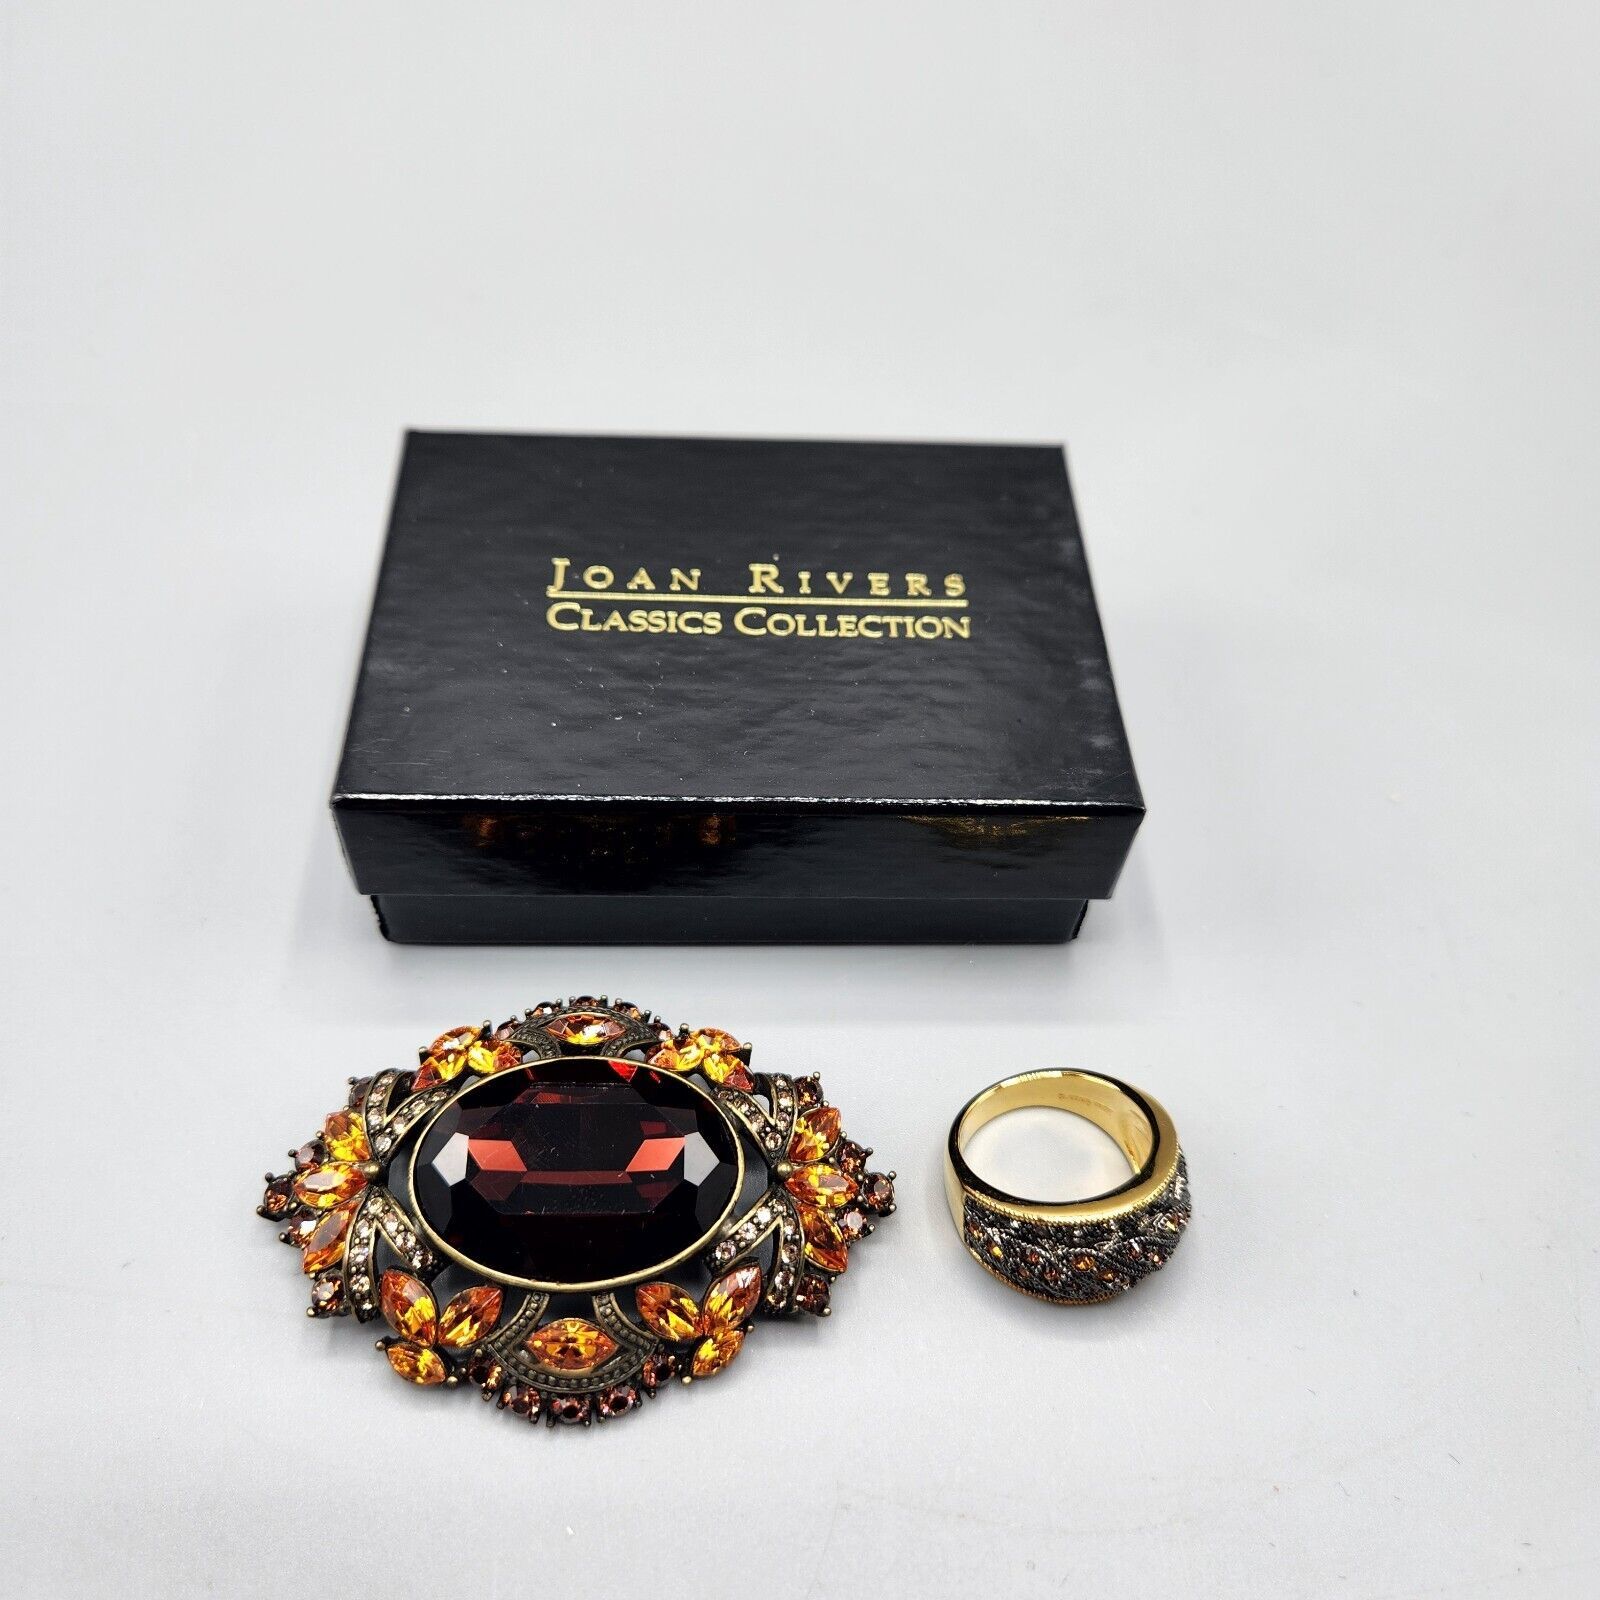 Joan Rivers Citrine Victorian Revival Brooch + Ring Gold Tone Signed w/ Box - $87.07